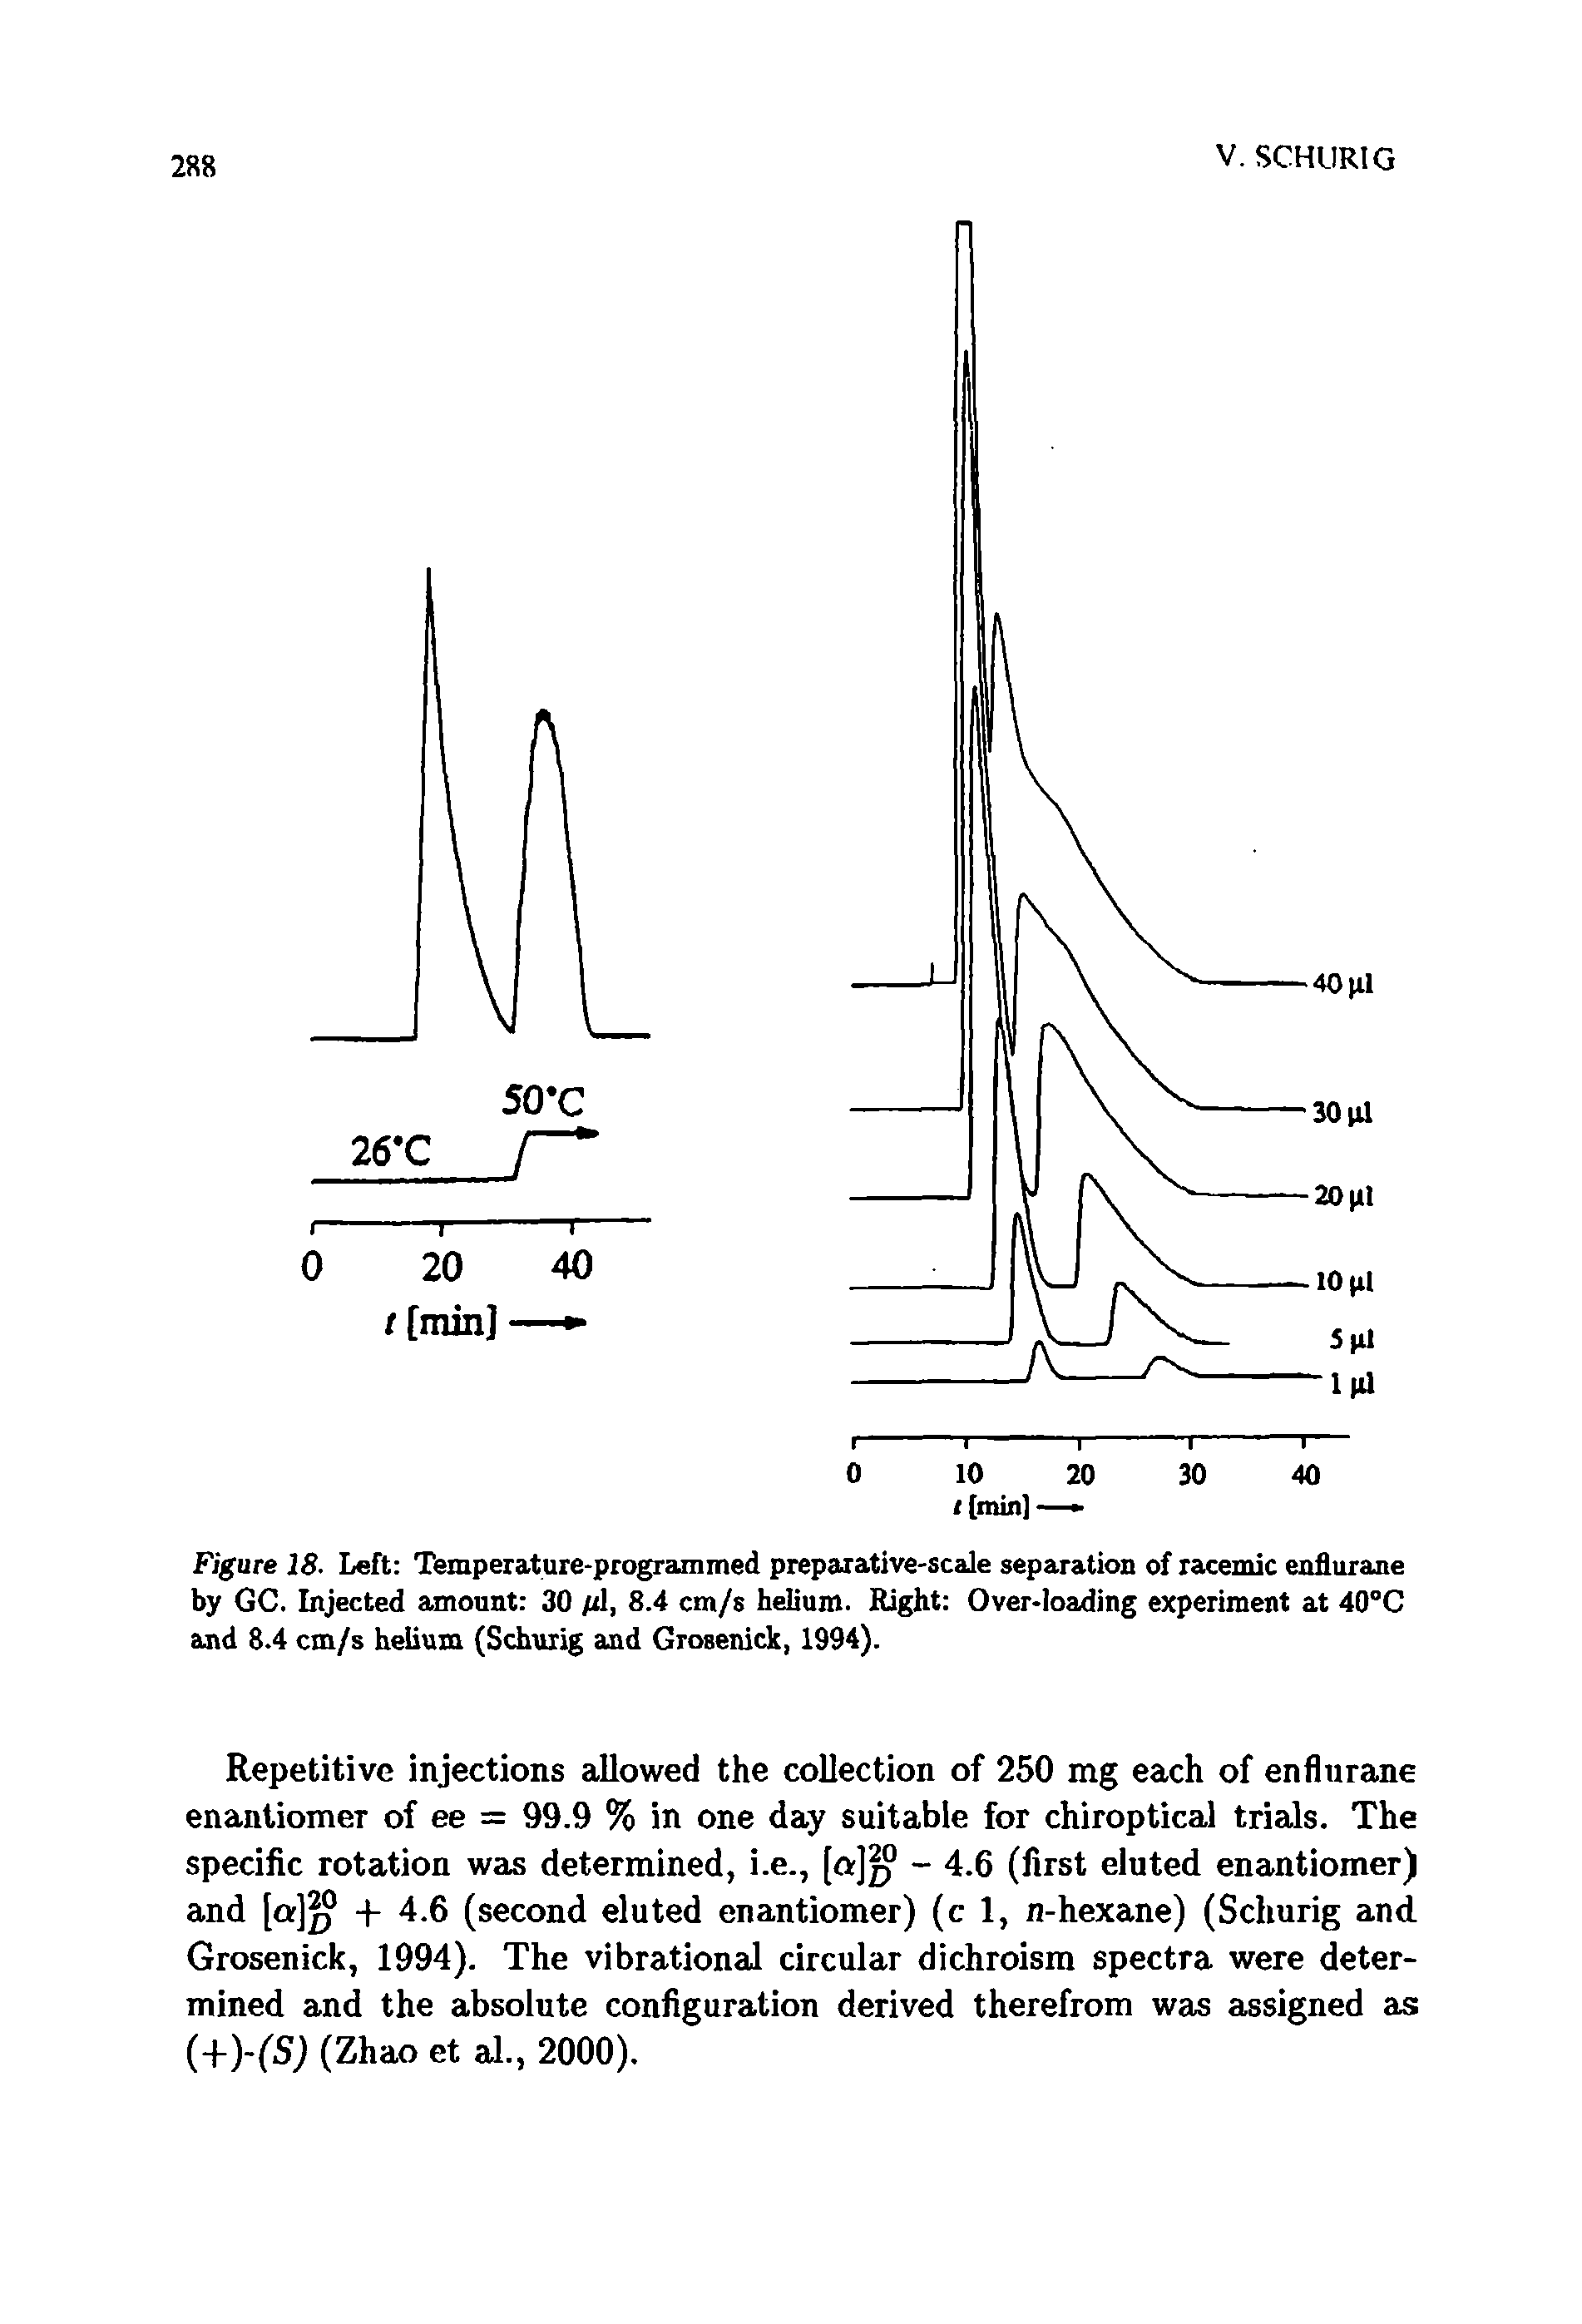 Figure 18. Left Temperature-programmed preparative-scale separation of racemic enflurane by GC. Injected amount 30 /A, 8.4 cm/s helium. Bight Over-loading experiment at 40°C and 8.4 cm/s helium (Schurig and GTosenick, 1994).